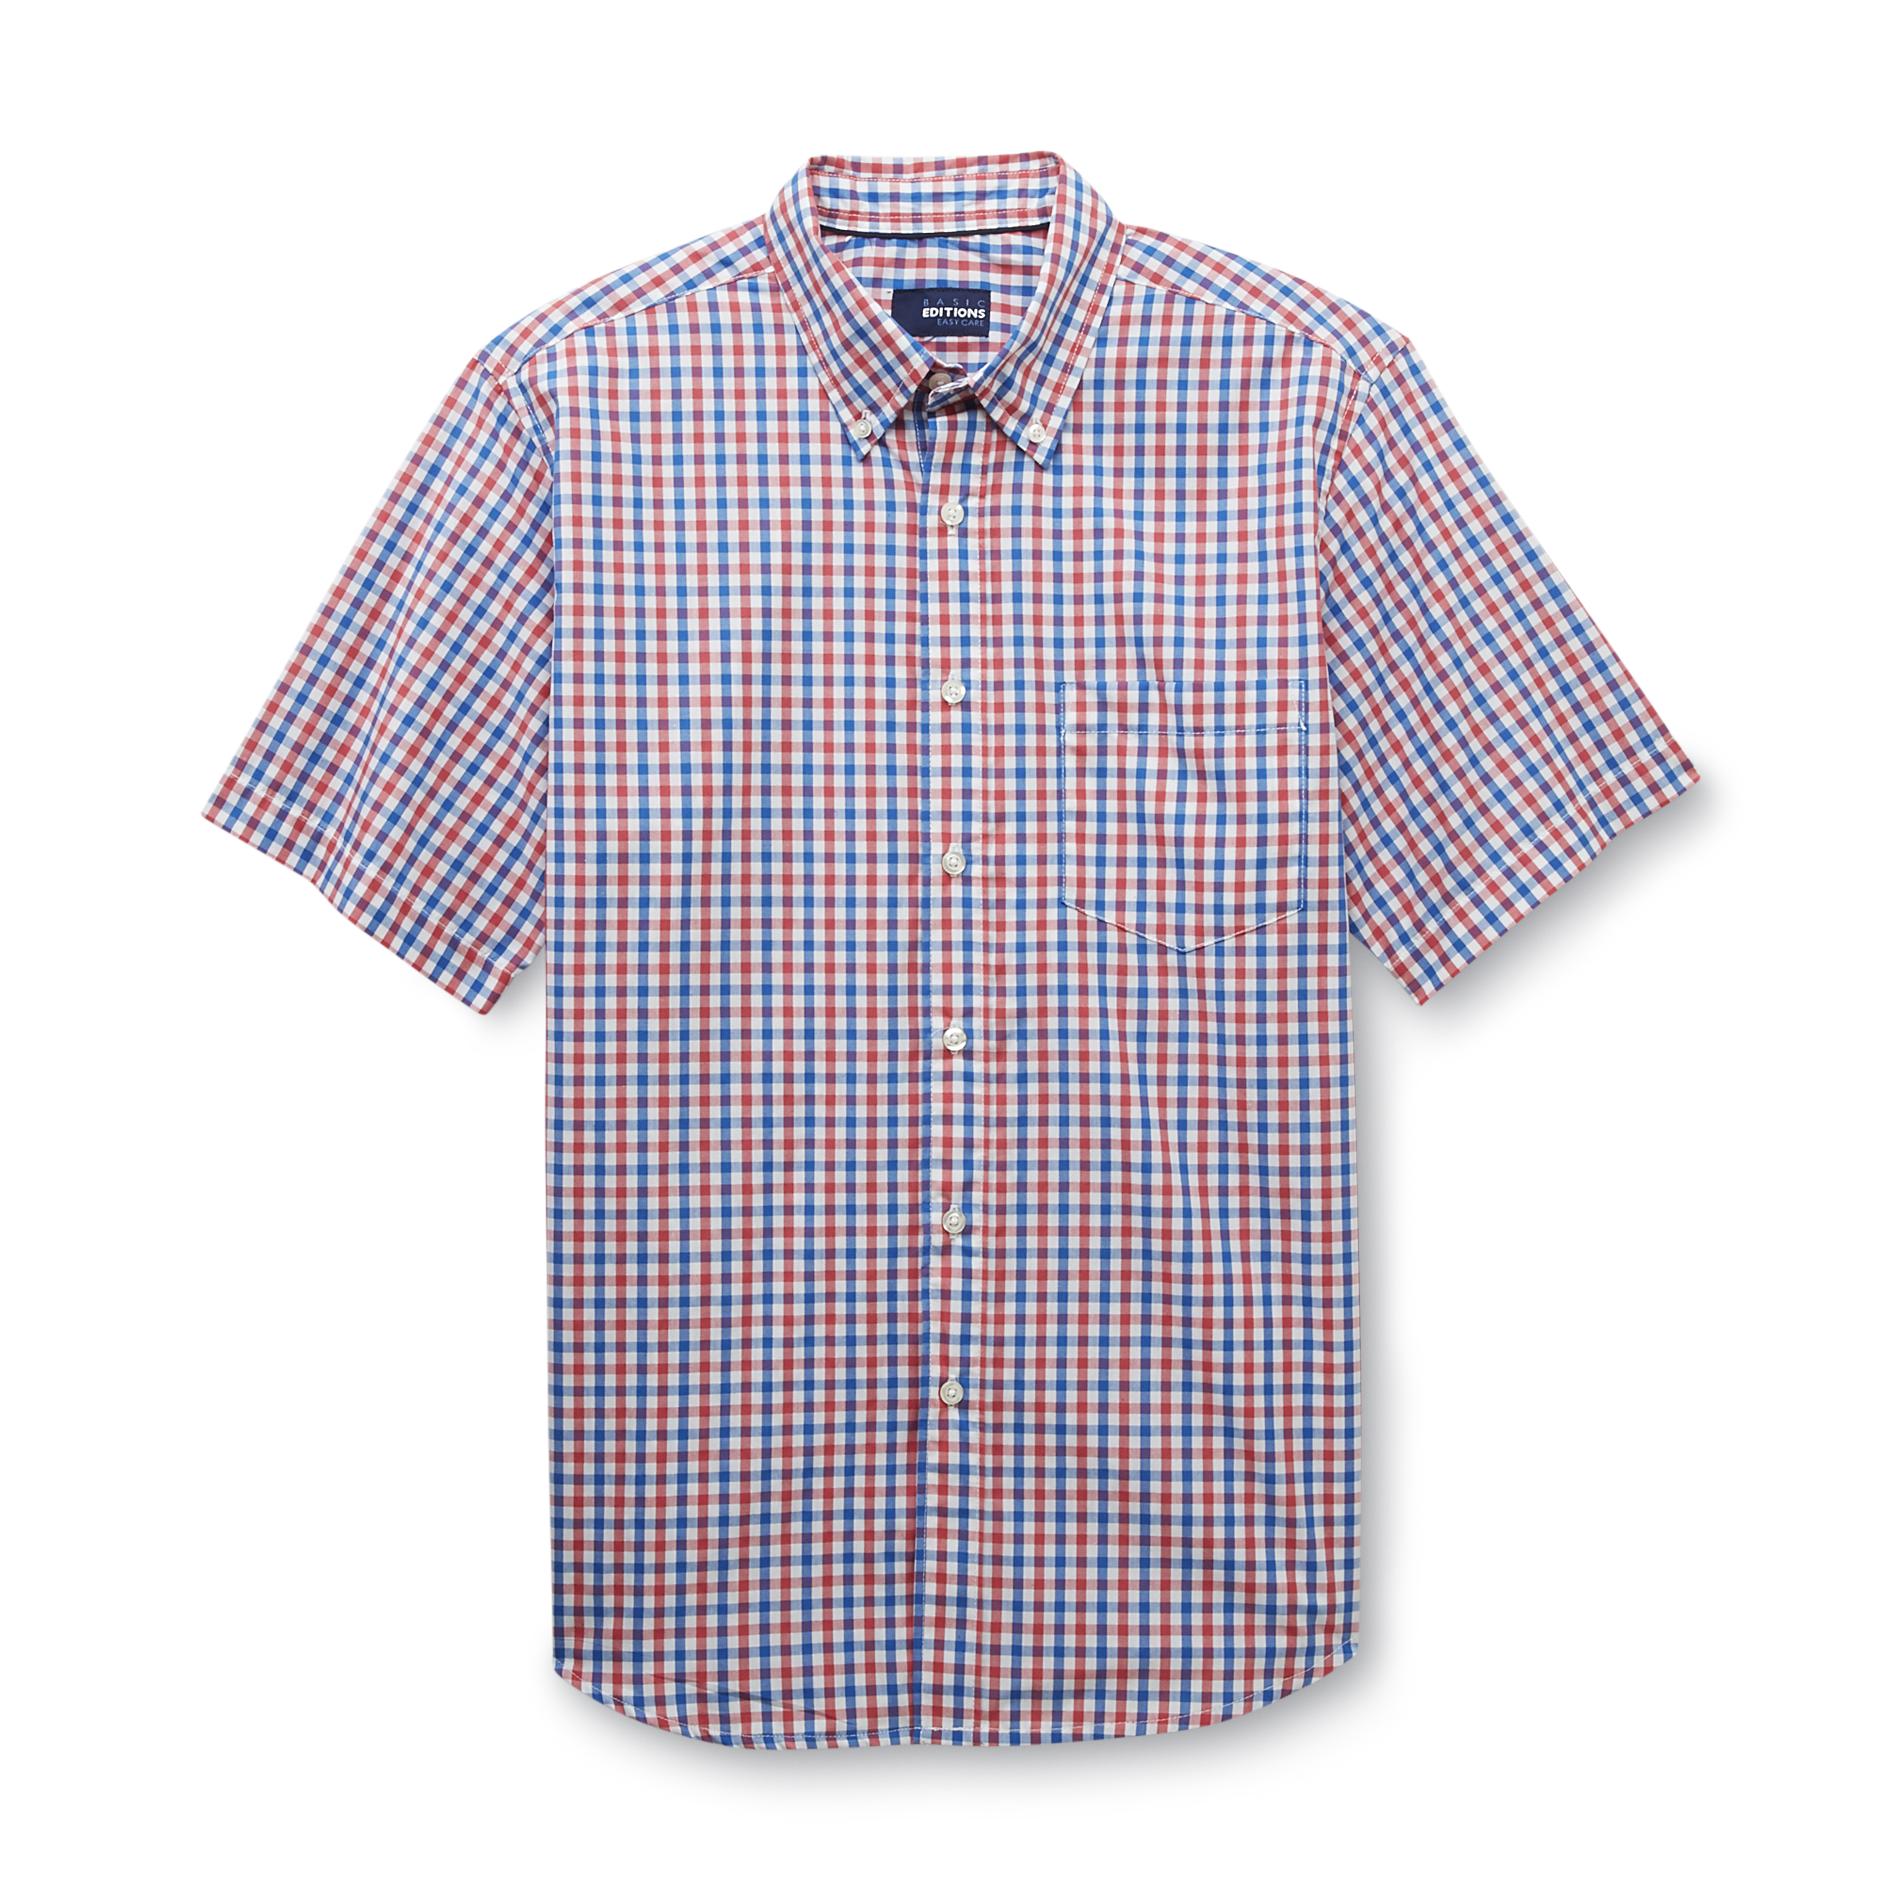 Basic Editions Men's Button-Front Shirt - Checked